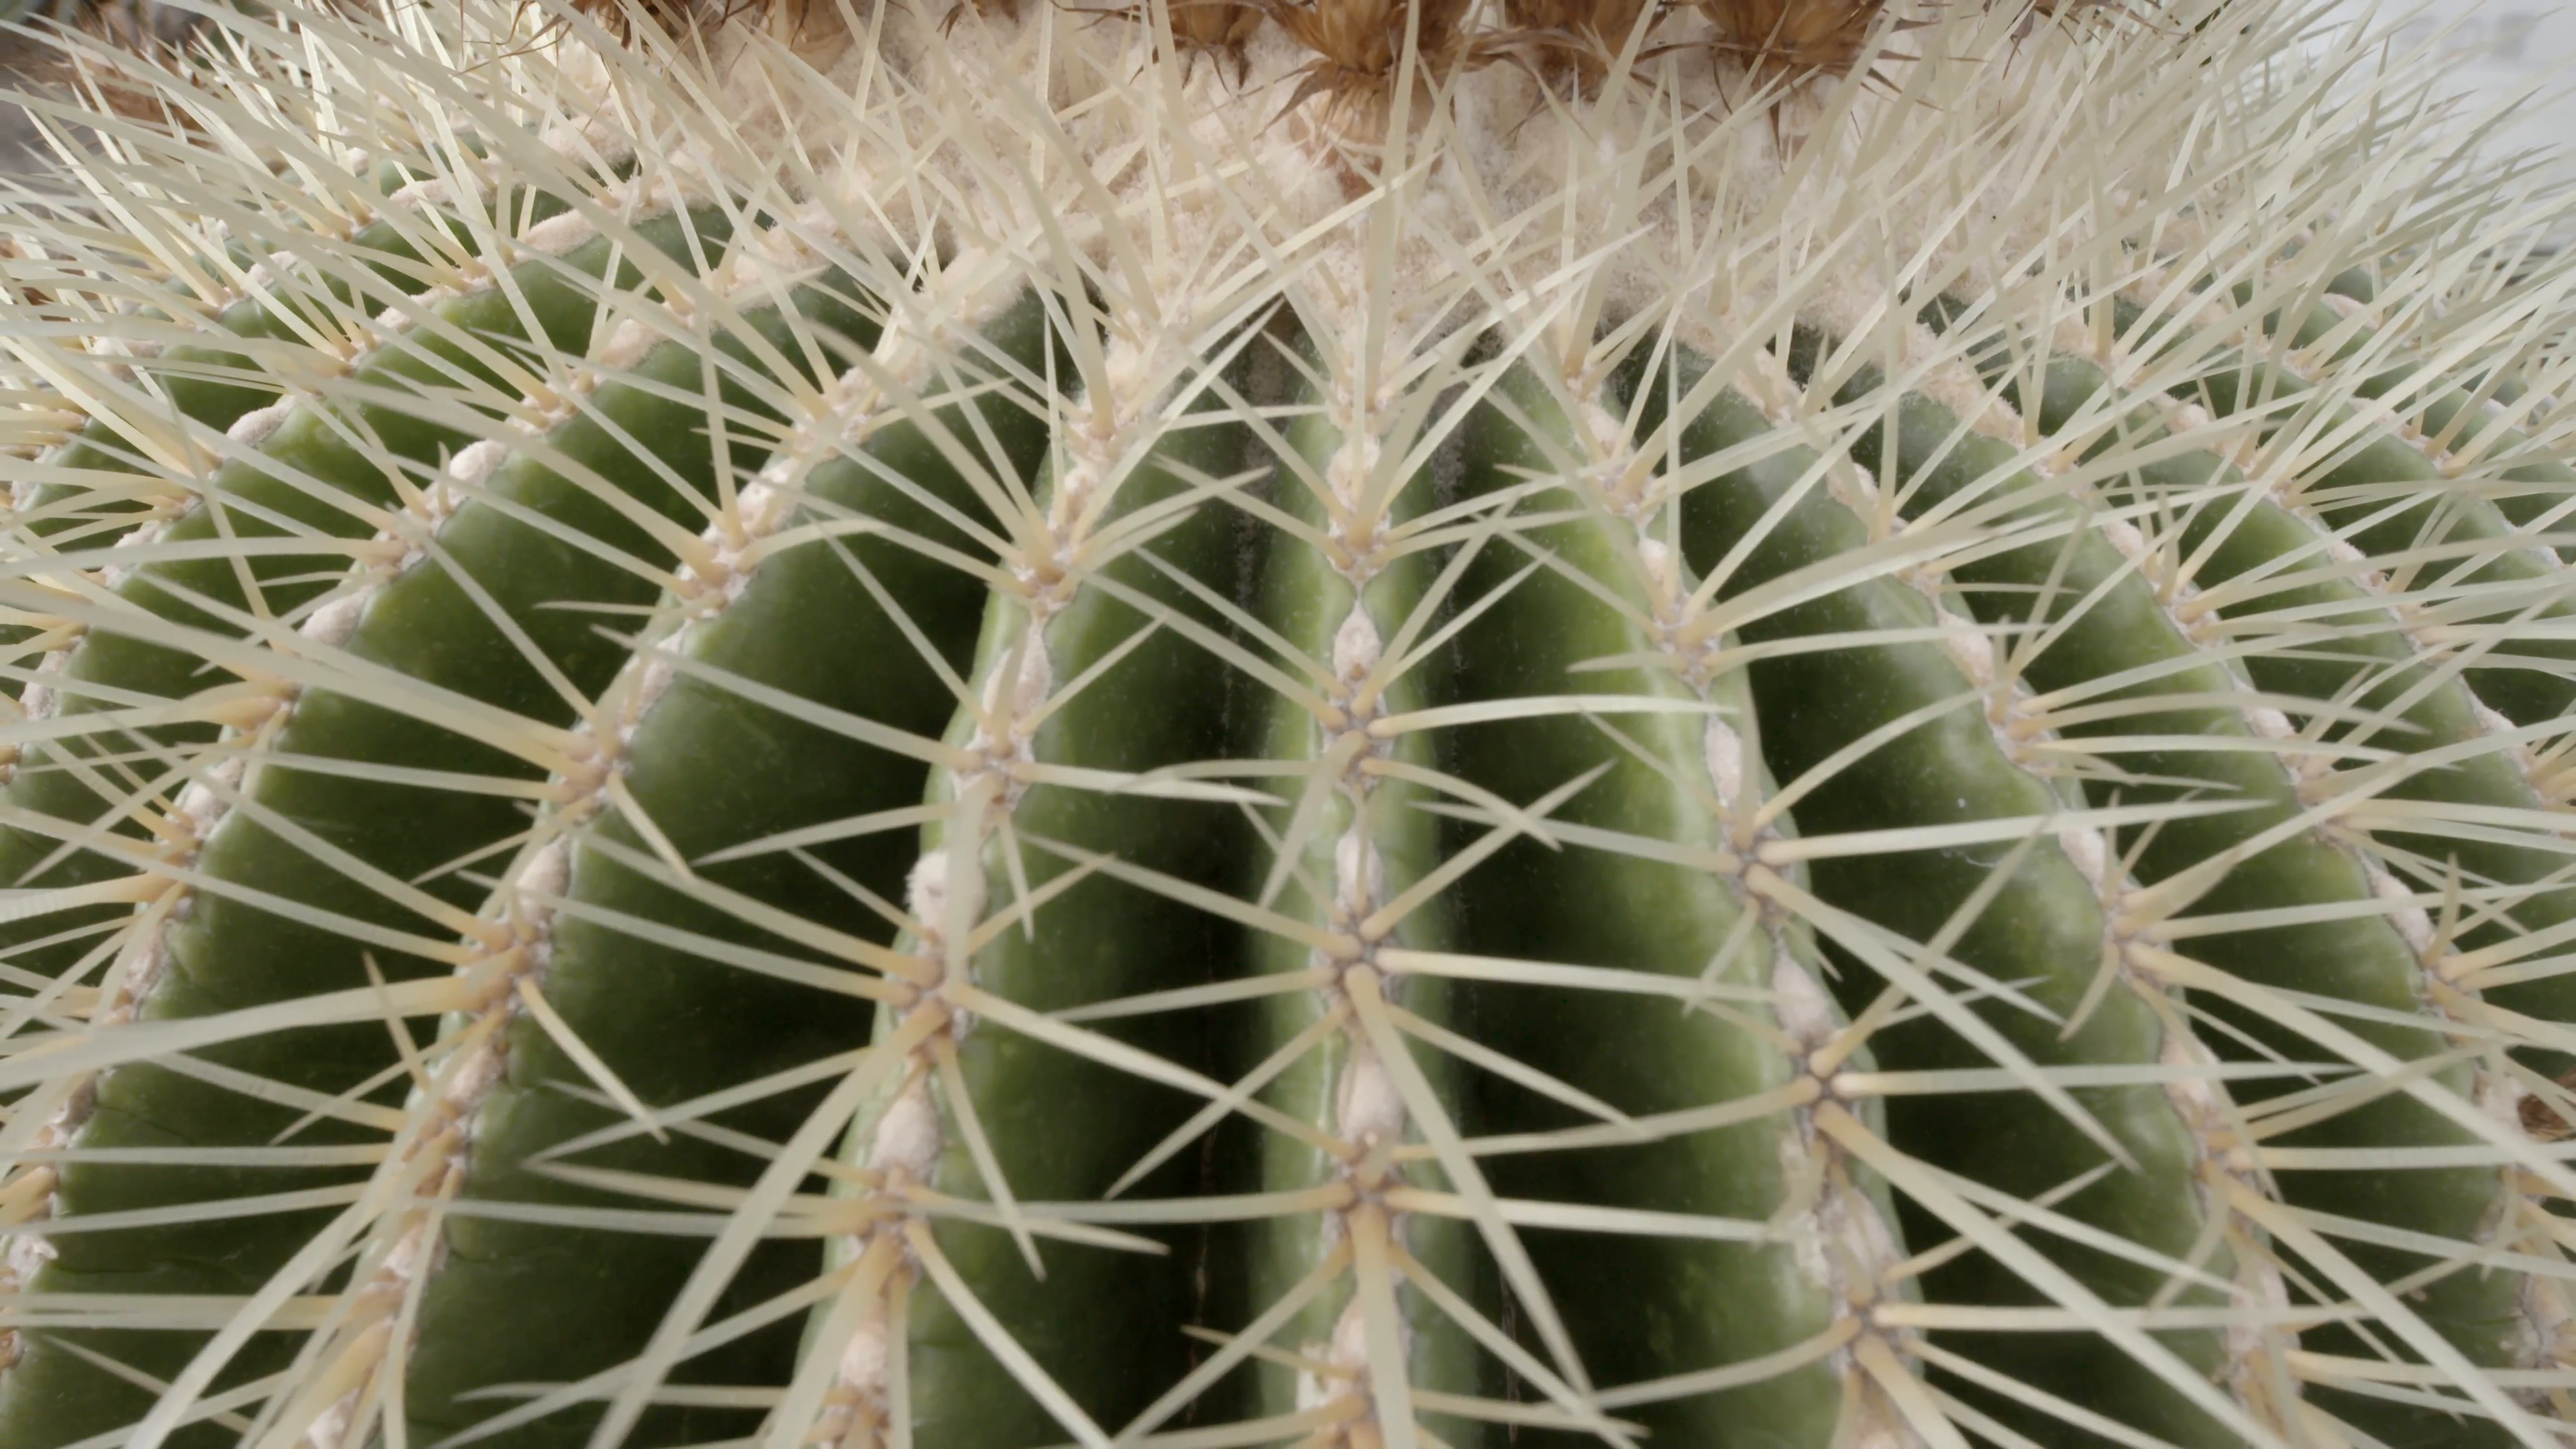 Prickly Round Green Cactus Close Up Spikes Stock Video Footage ...